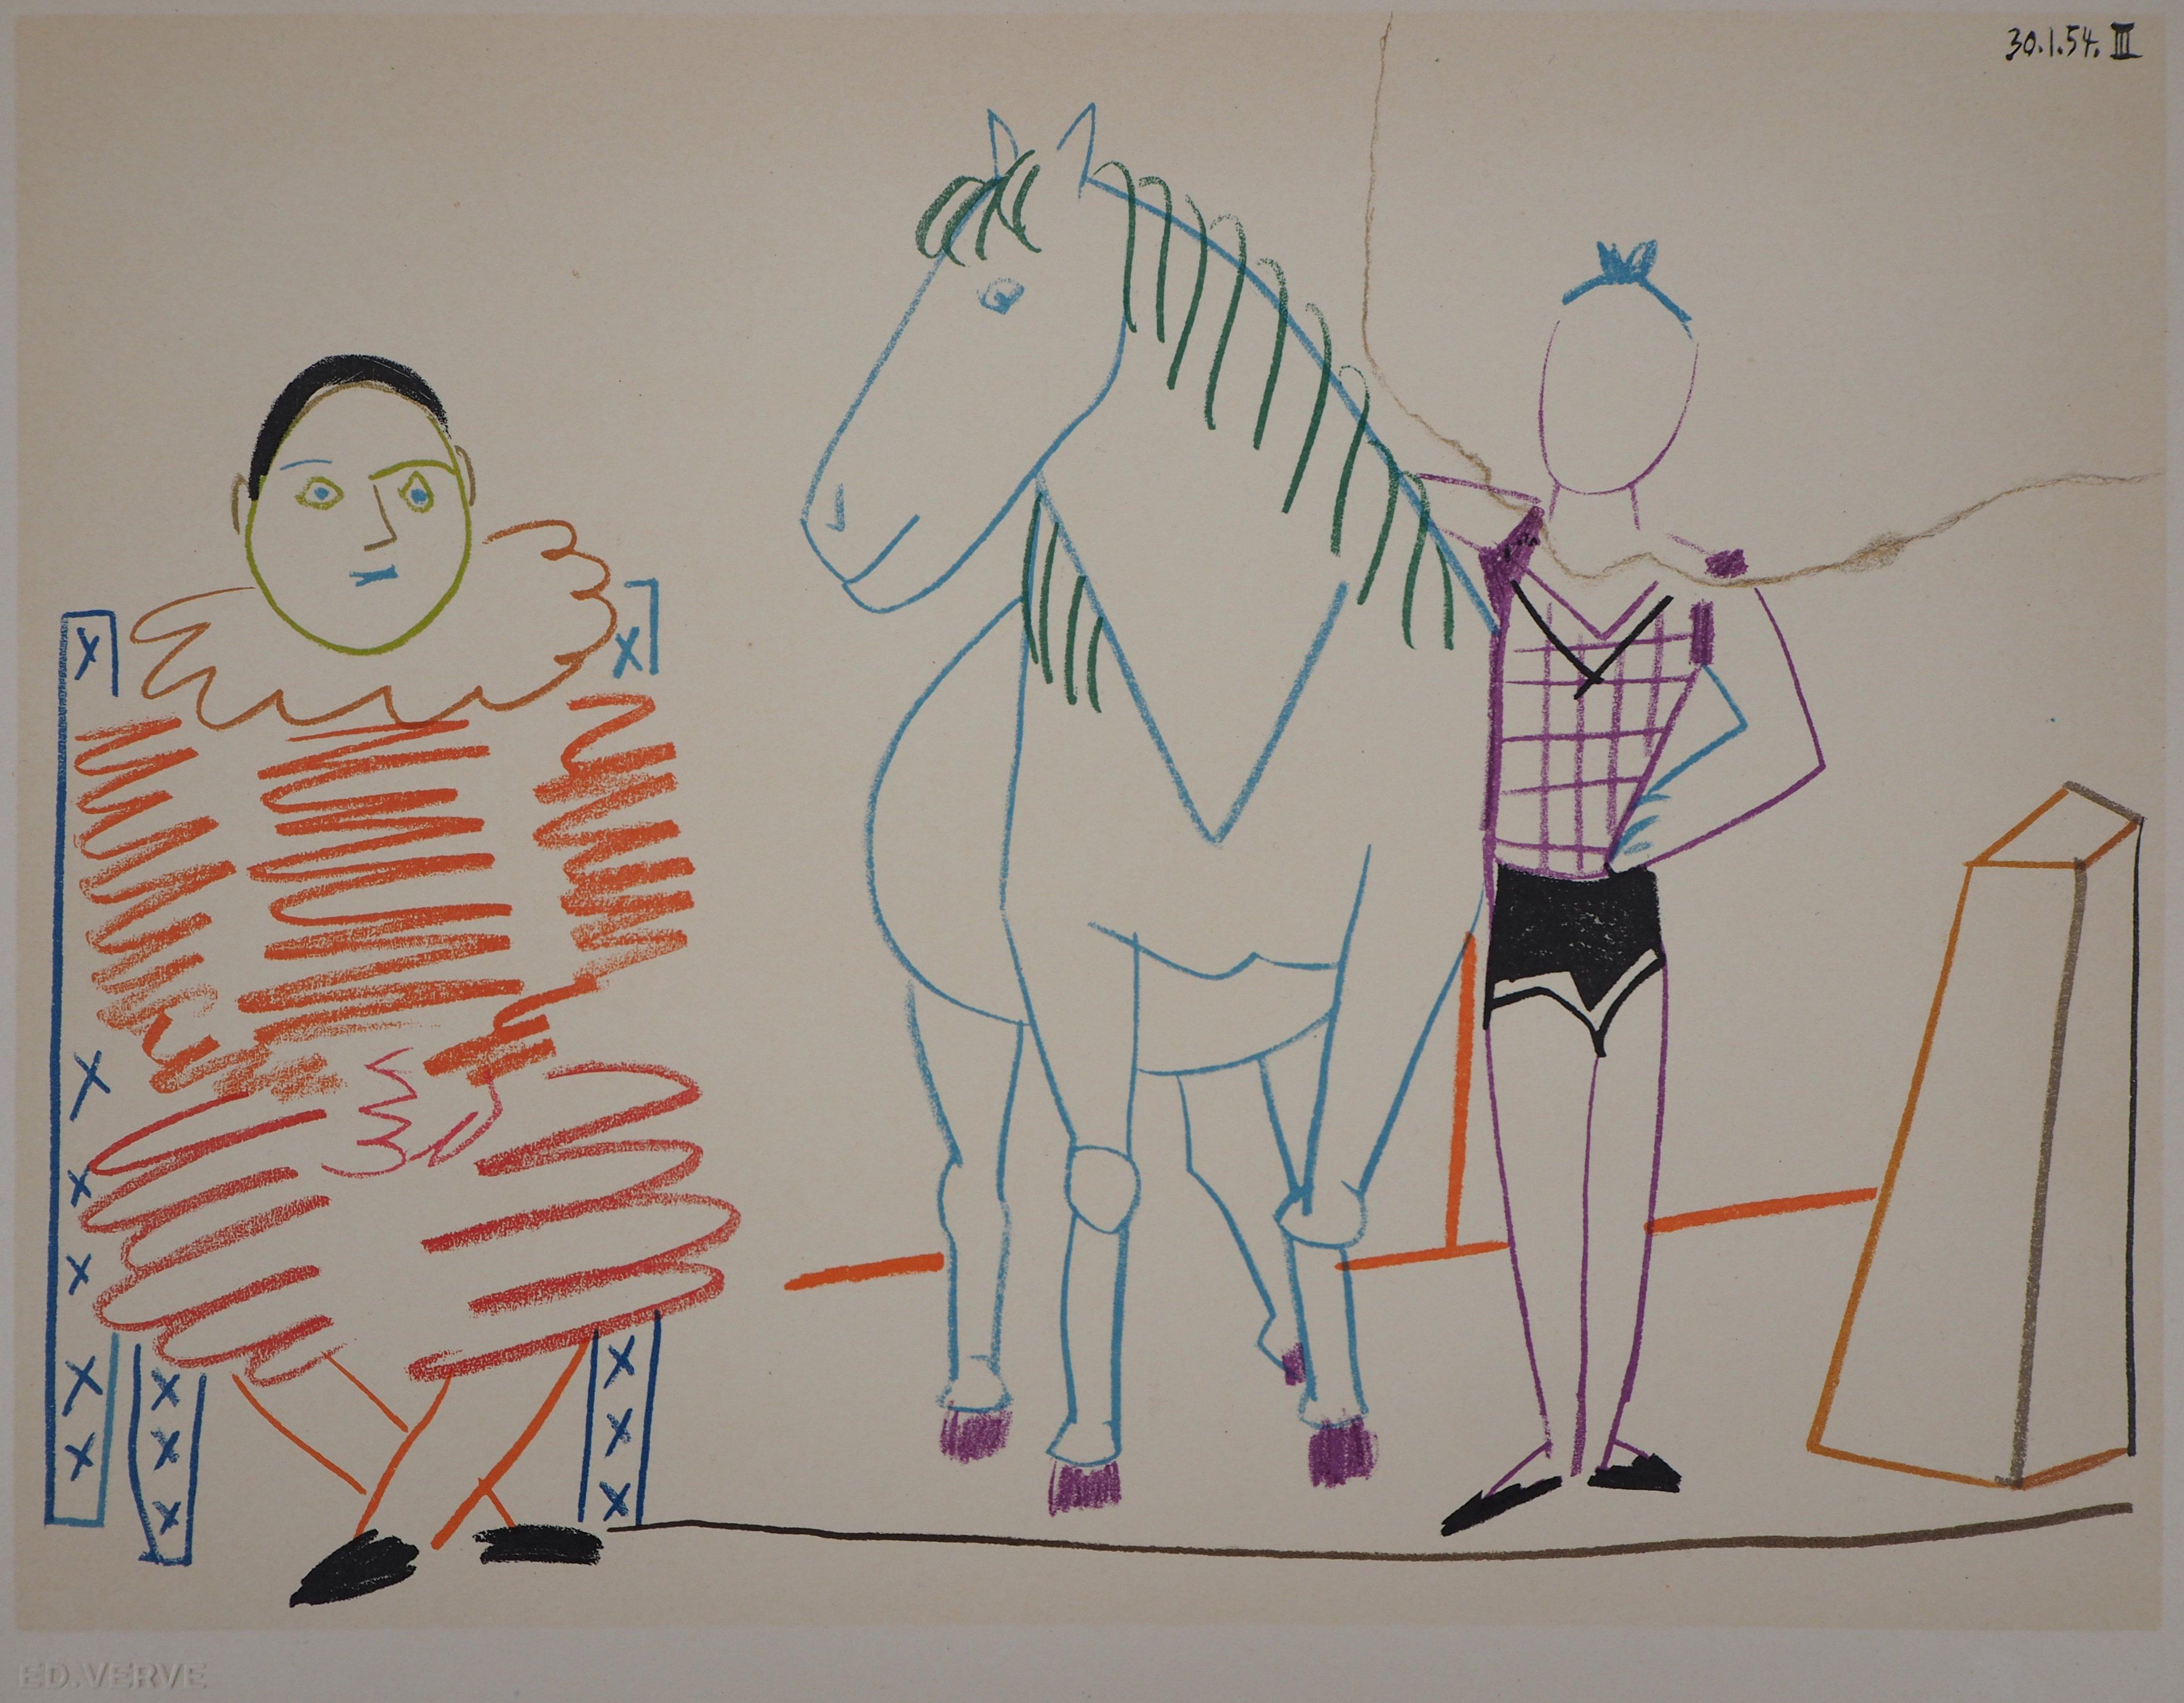 (after) Pablo Picasso Figurative Print - The Horse and the Clown - Litograph On Arches Vellum - Verve, Mourlot 